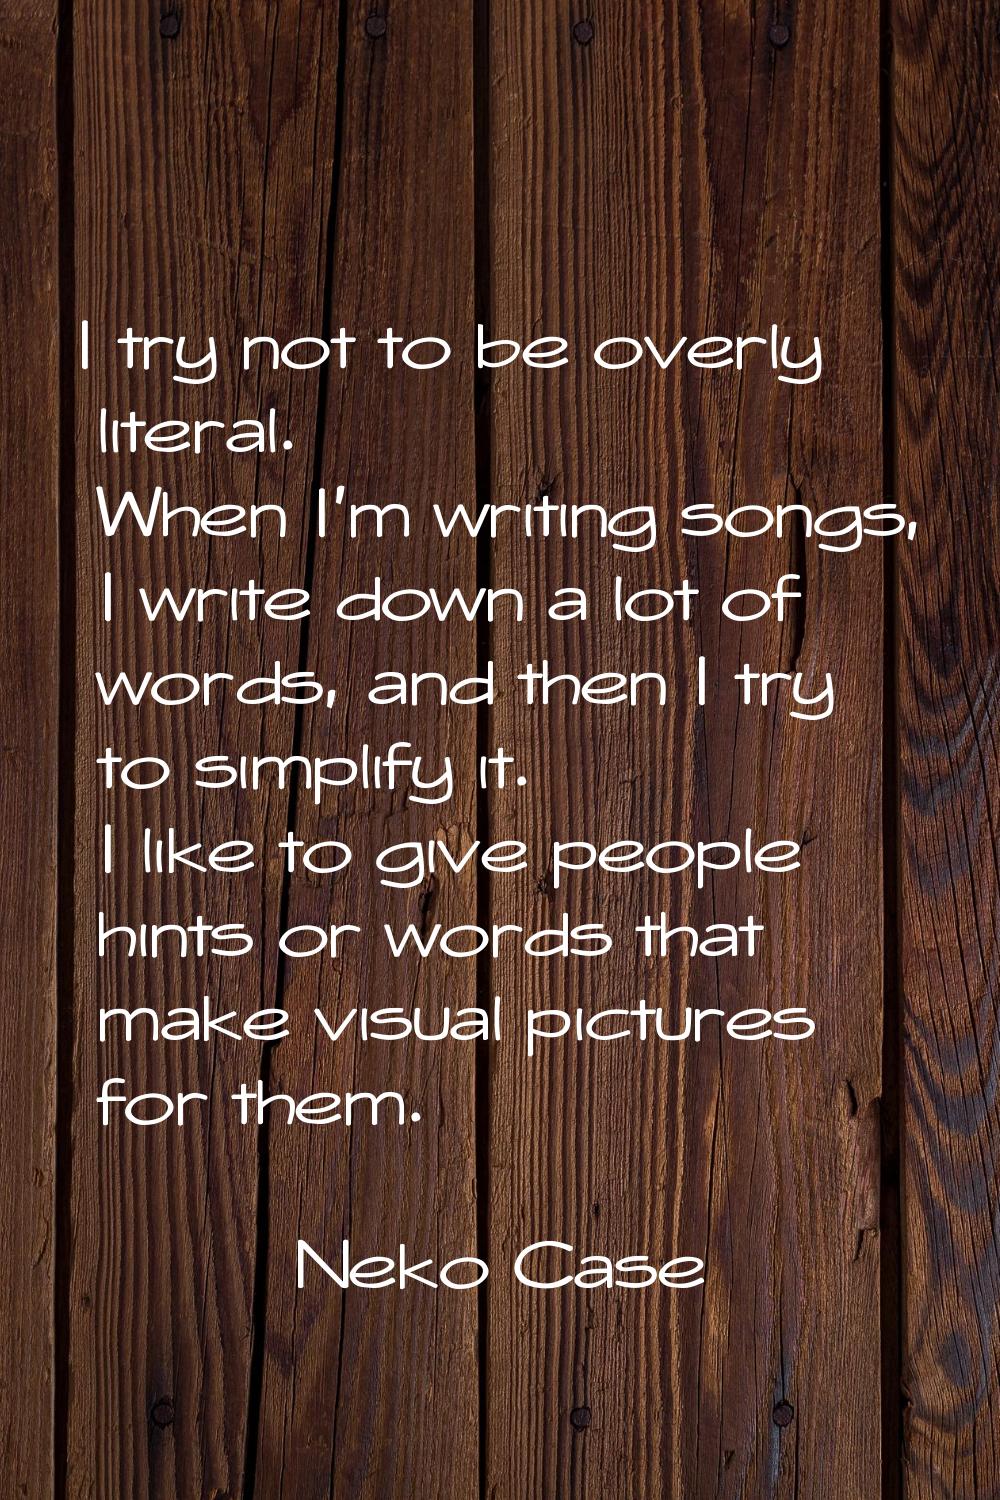 I try not to be overly literal. When I'm writing songs, I write down a lot of words, and then I try